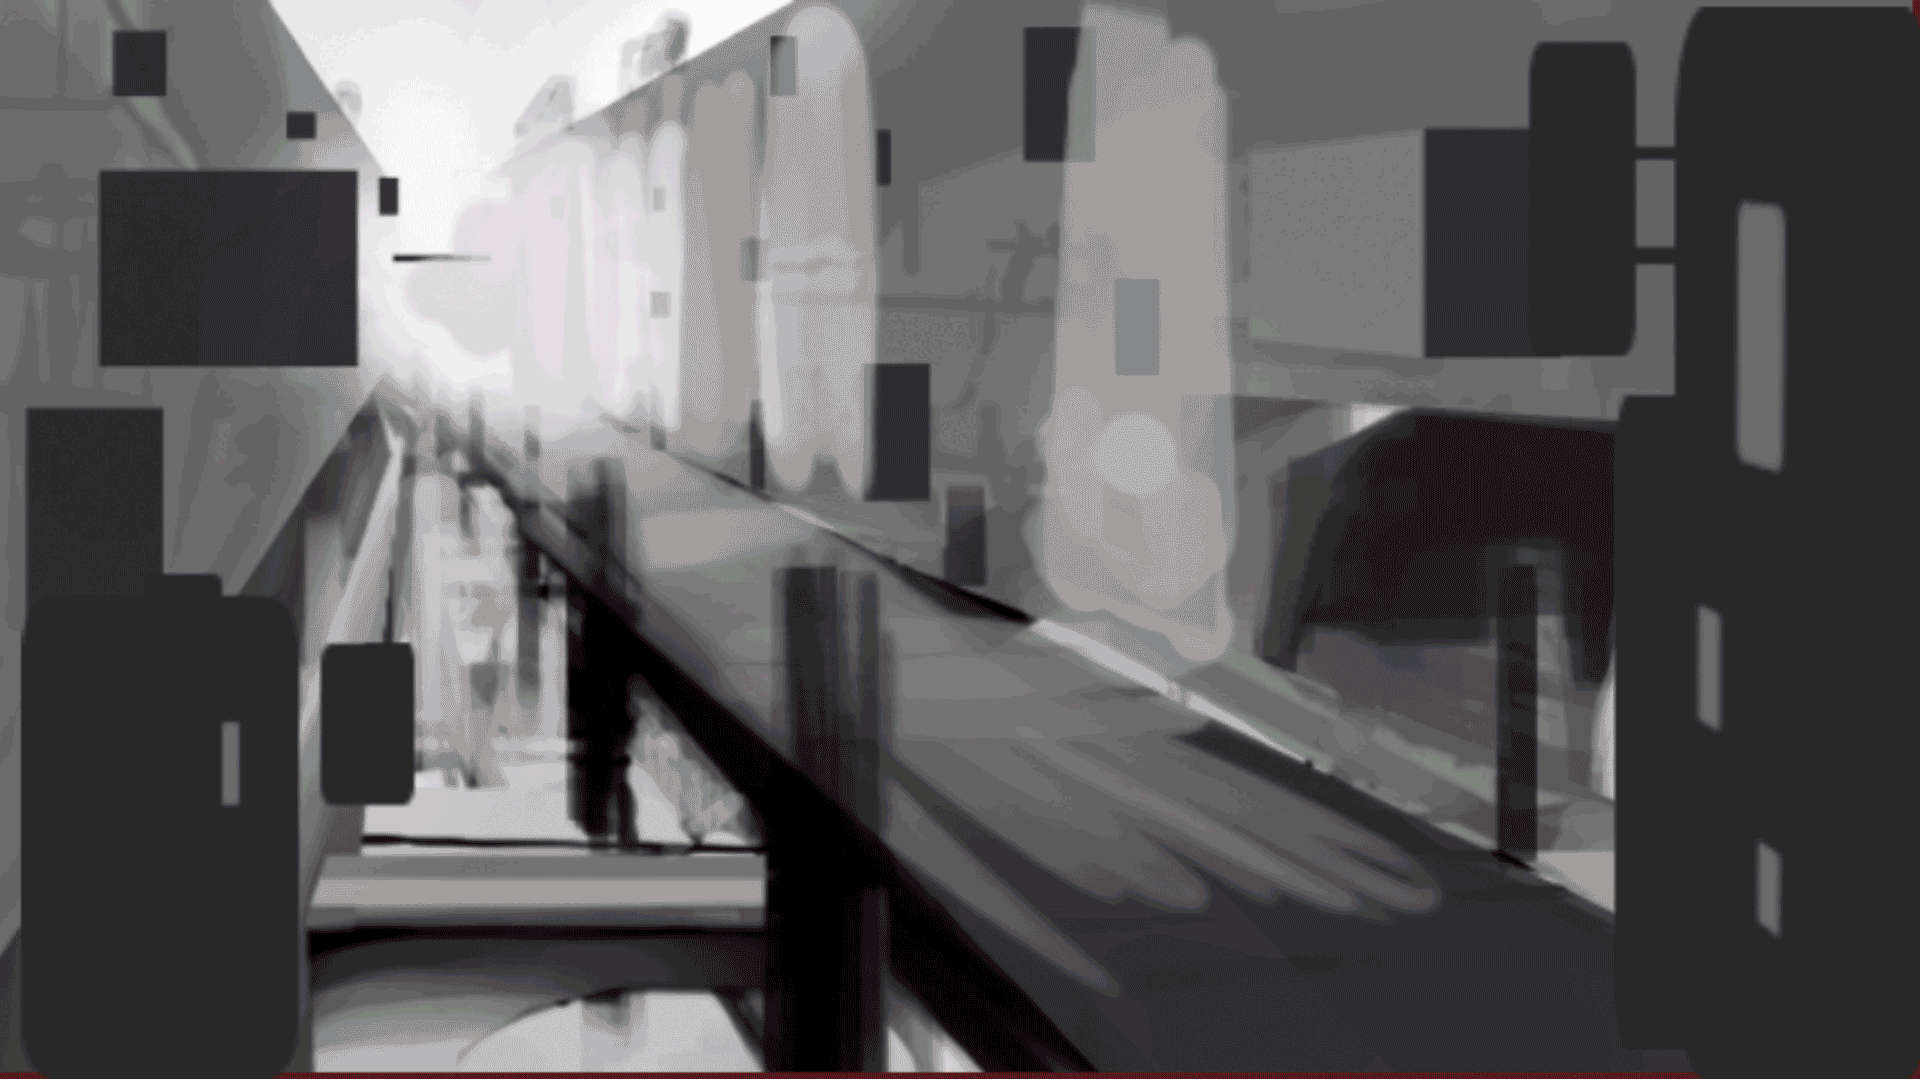 Five images looping in a gif showing the process of creating a landscape town. Image one is the initial concept, image two sets the lighting values in black and white, image three is a rough render setting in a basic brown tone, image four adds arcs over the railroad and changes the lighting after a draw over, and image five is the final render with corrections to the perspective. Added effects include lighting and fog, and the removal of signs to draw more attention to the train in the distance.